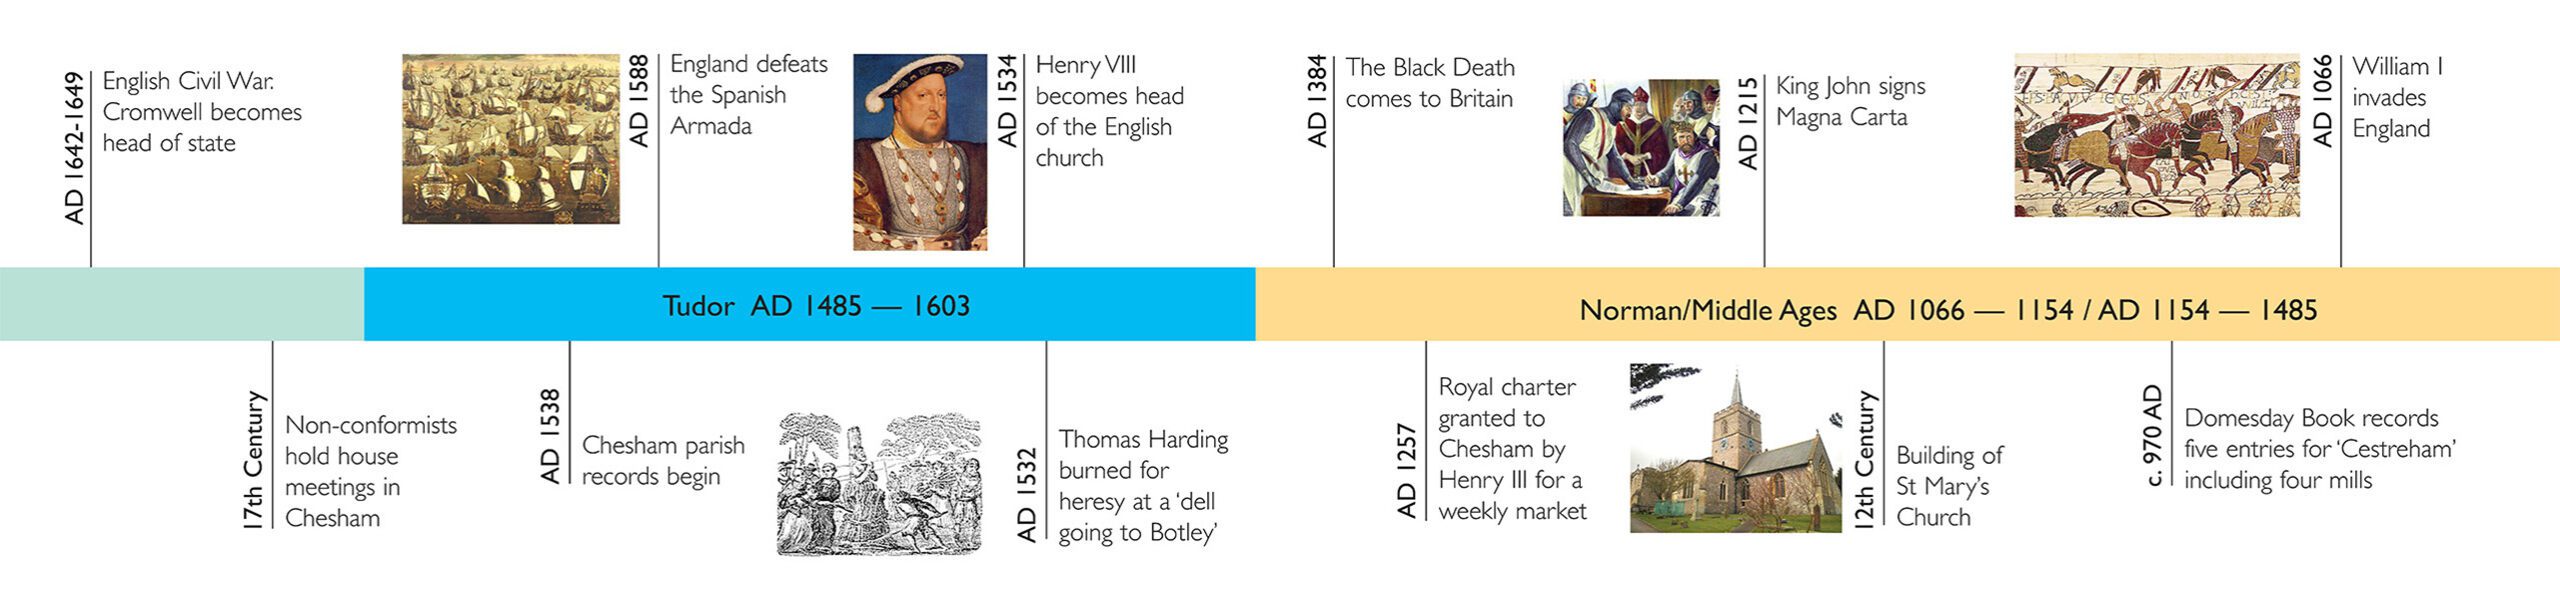 Timeline of Chesham historical events showing the Tudor years